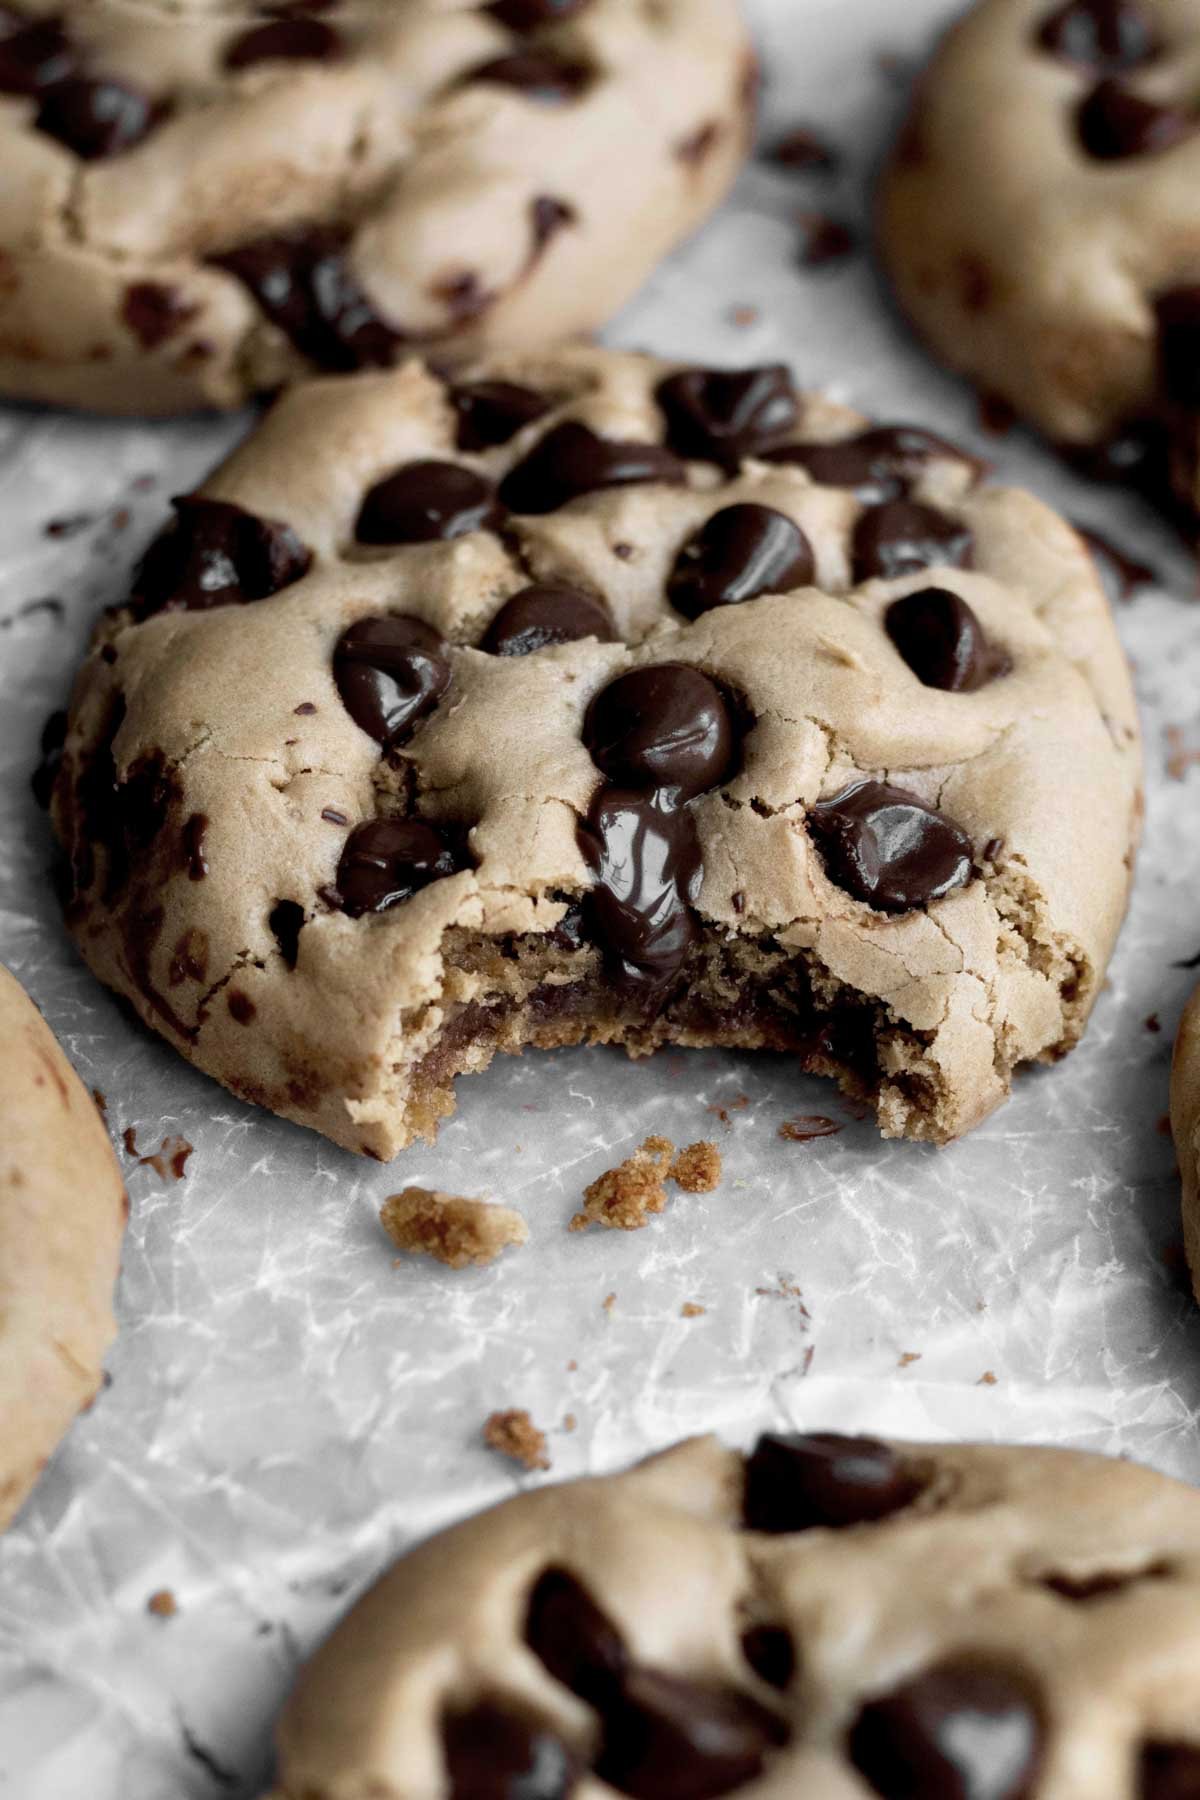 A bite reveals the cookie's crisp outer edges and chewy inner texture.